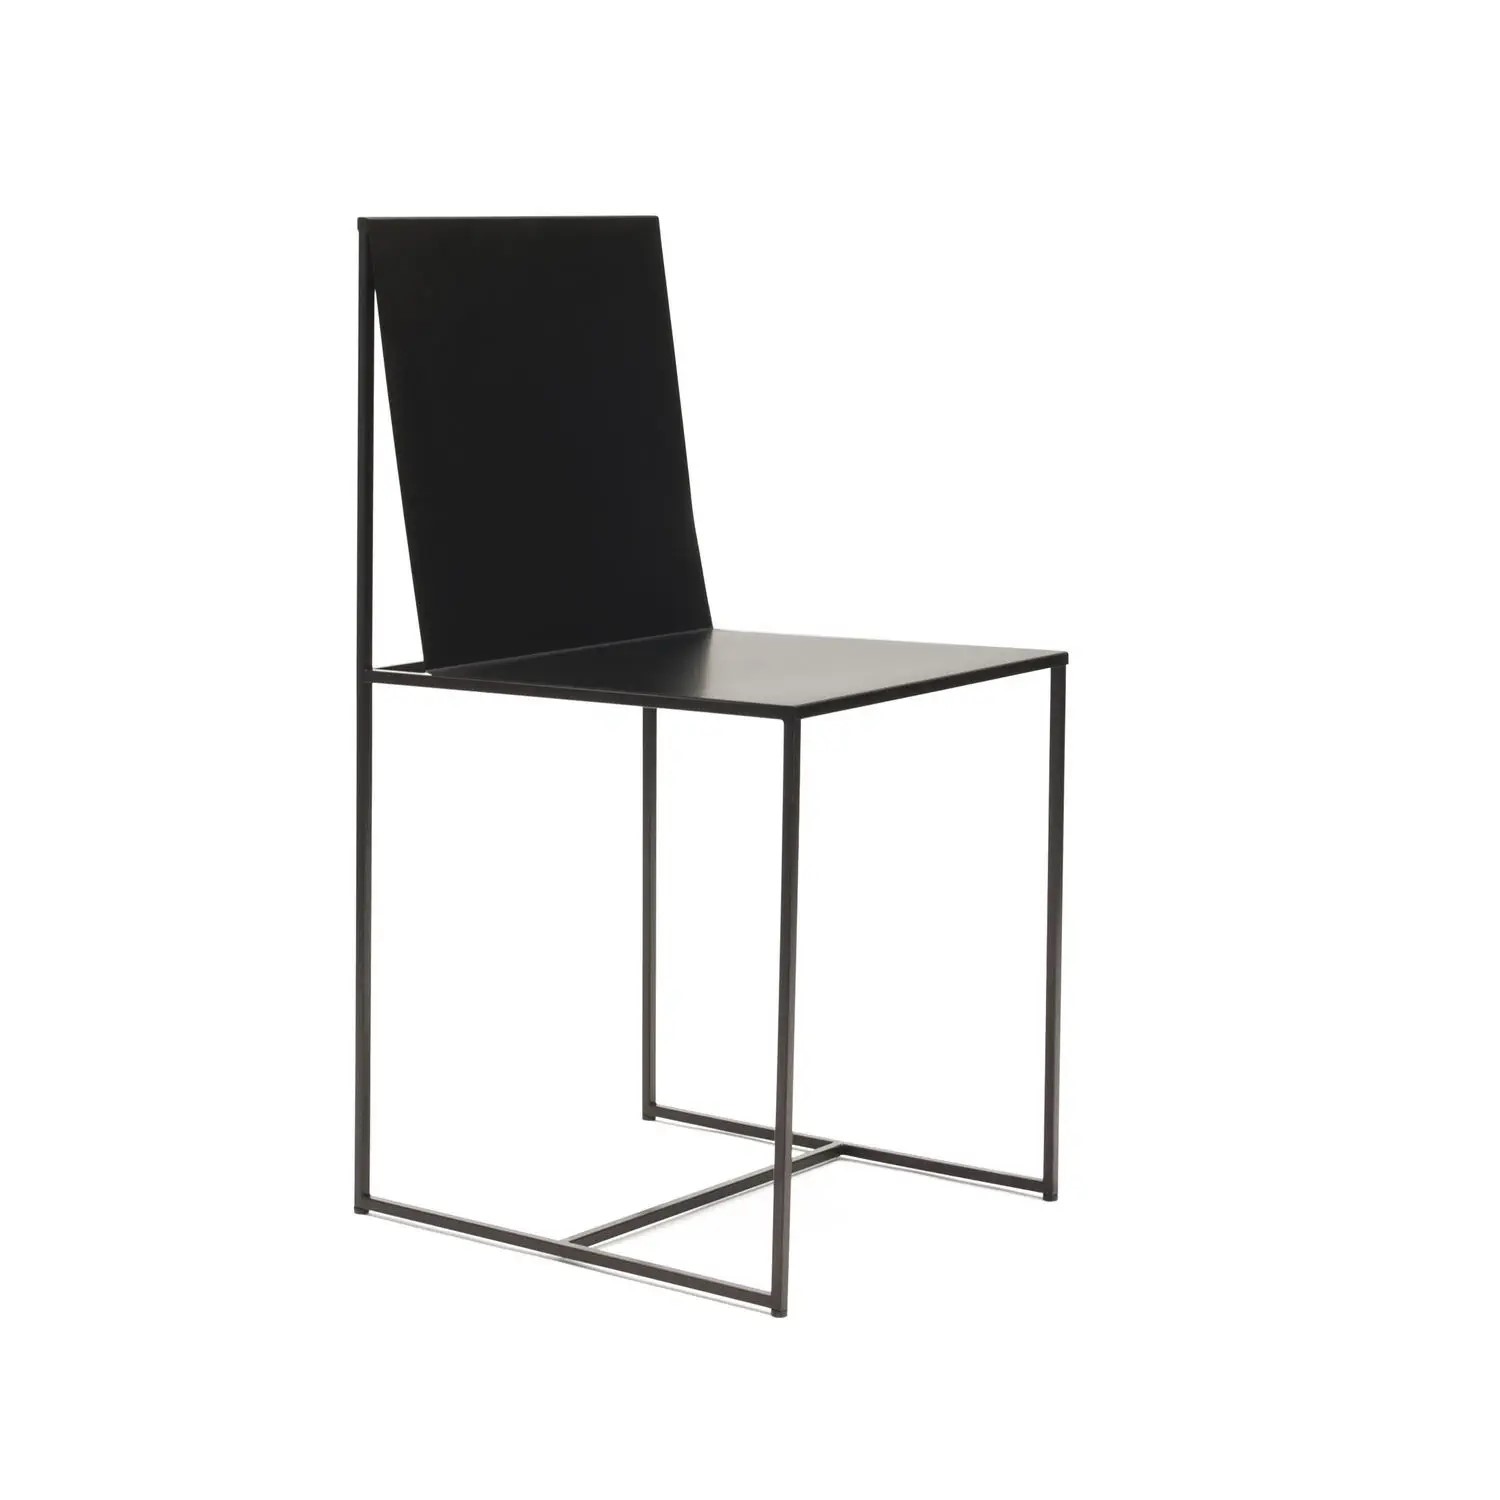 SLIM SISSI chair - set of 2 pieces